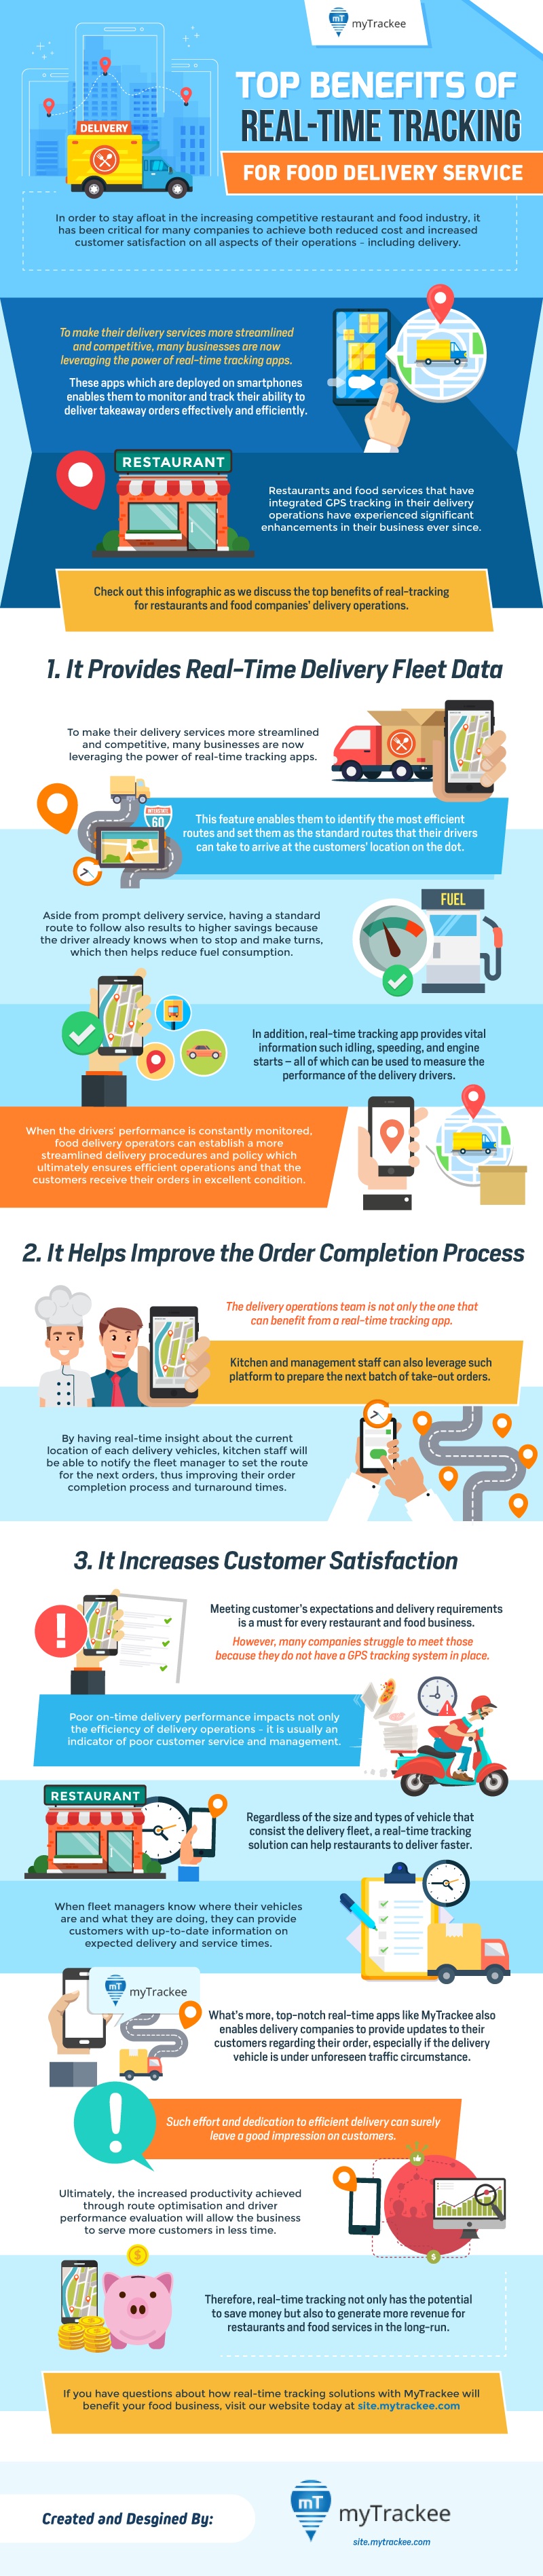 Top Benefits of Real-Time Tracking for Food Delivery Service (Infographic), Modern Restaurant Management